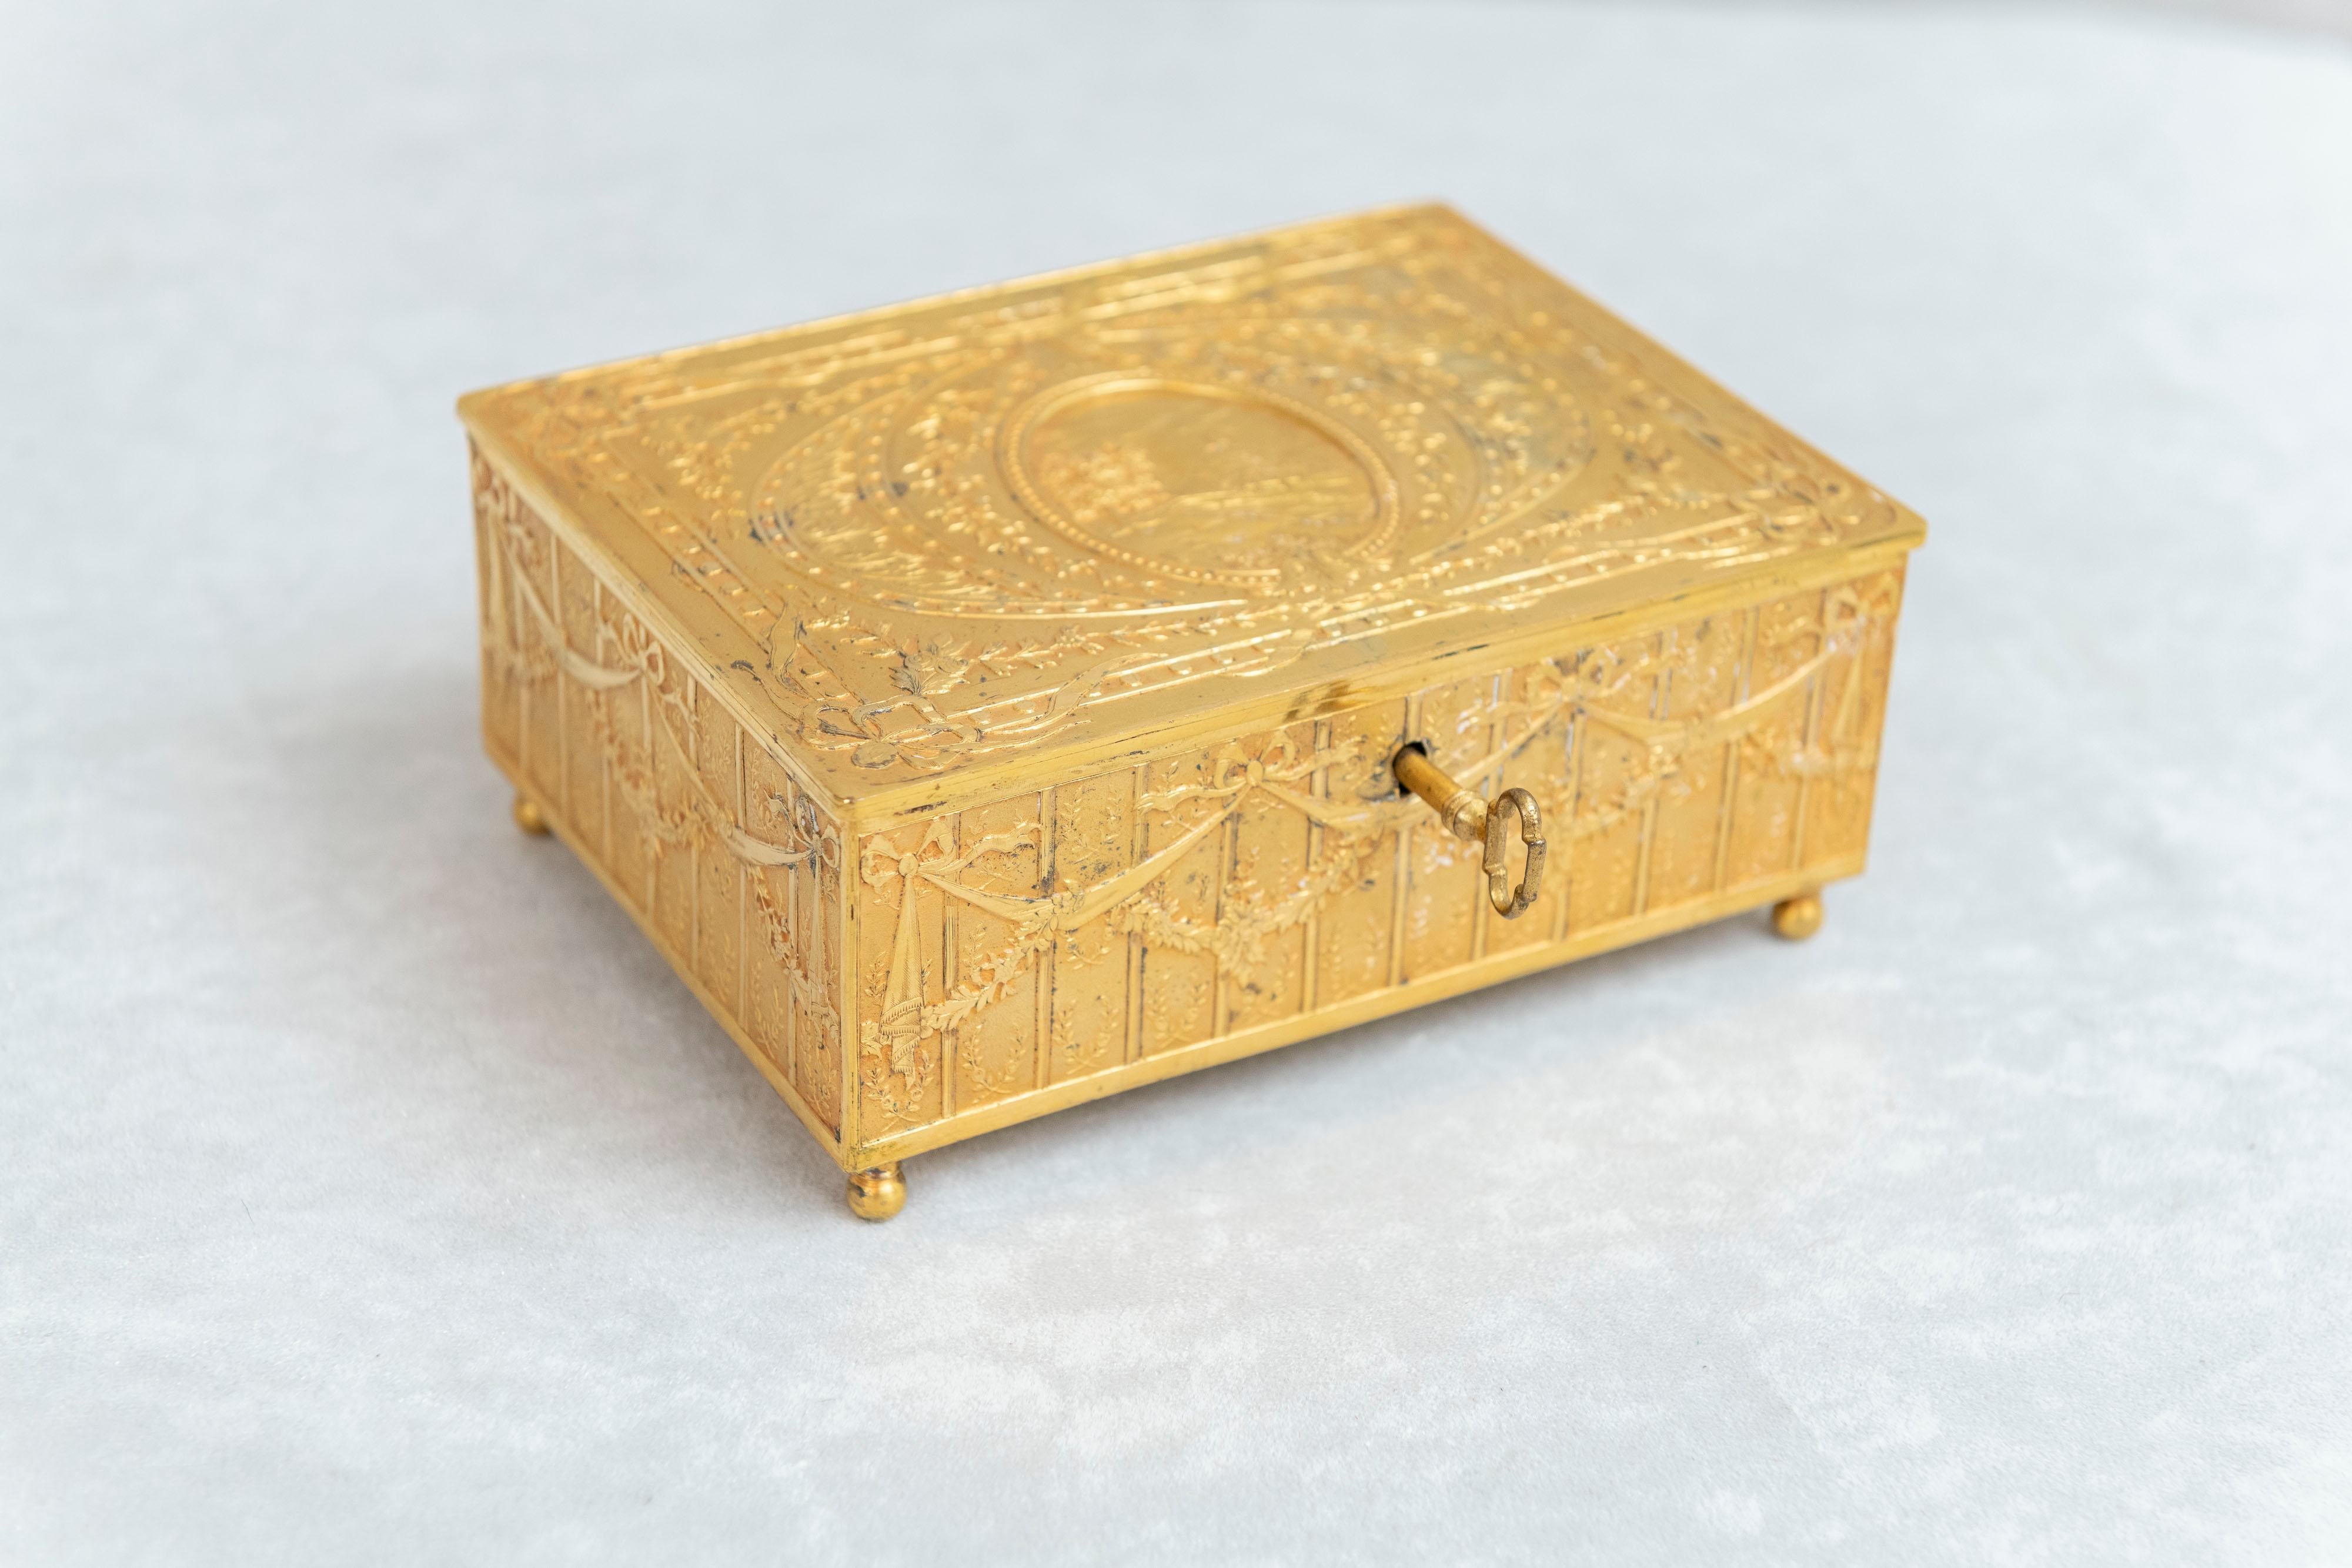 This beautiful box will make the perfect gift your lady. The quality and condition are exceptional, right down to the luscious original lining. Really, as nice a little jewelry box as we have offered in quite sometime. The original key is present,